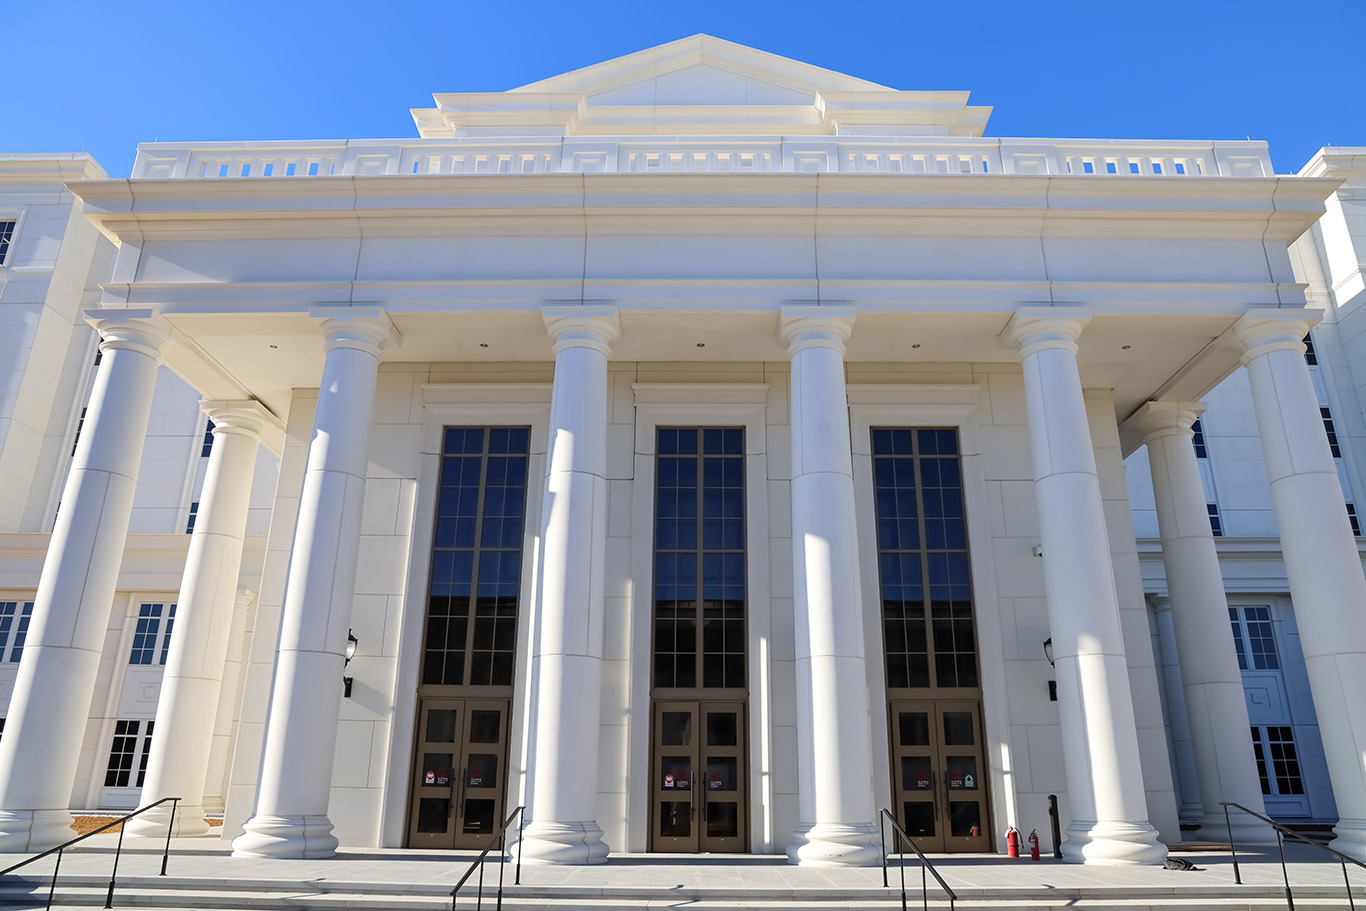 The new Spartanburg County courthouse facade features large white stone columns in a classic style.